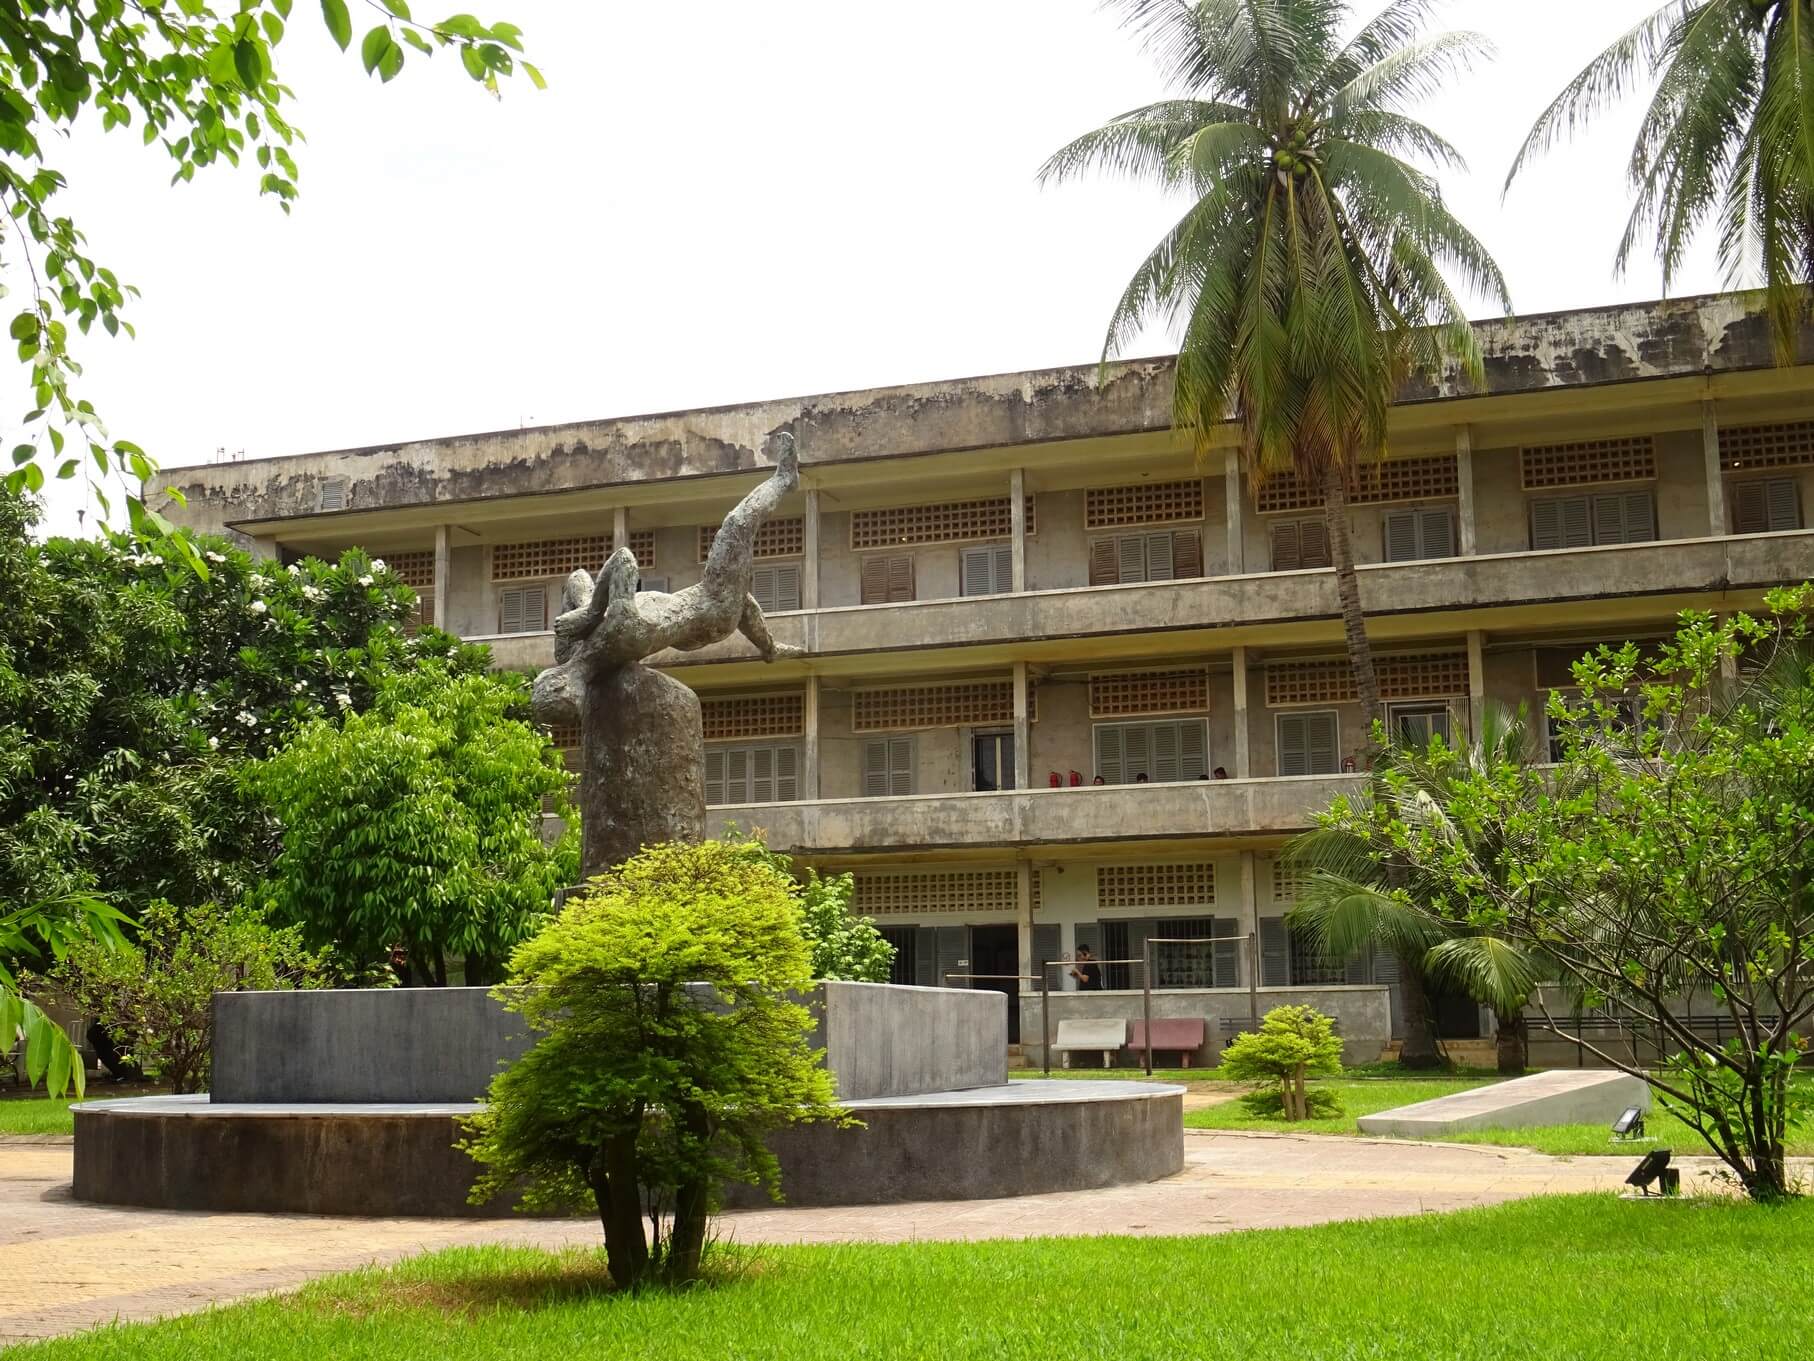 One of the buildings at Tuol Sleng Genocide Museum